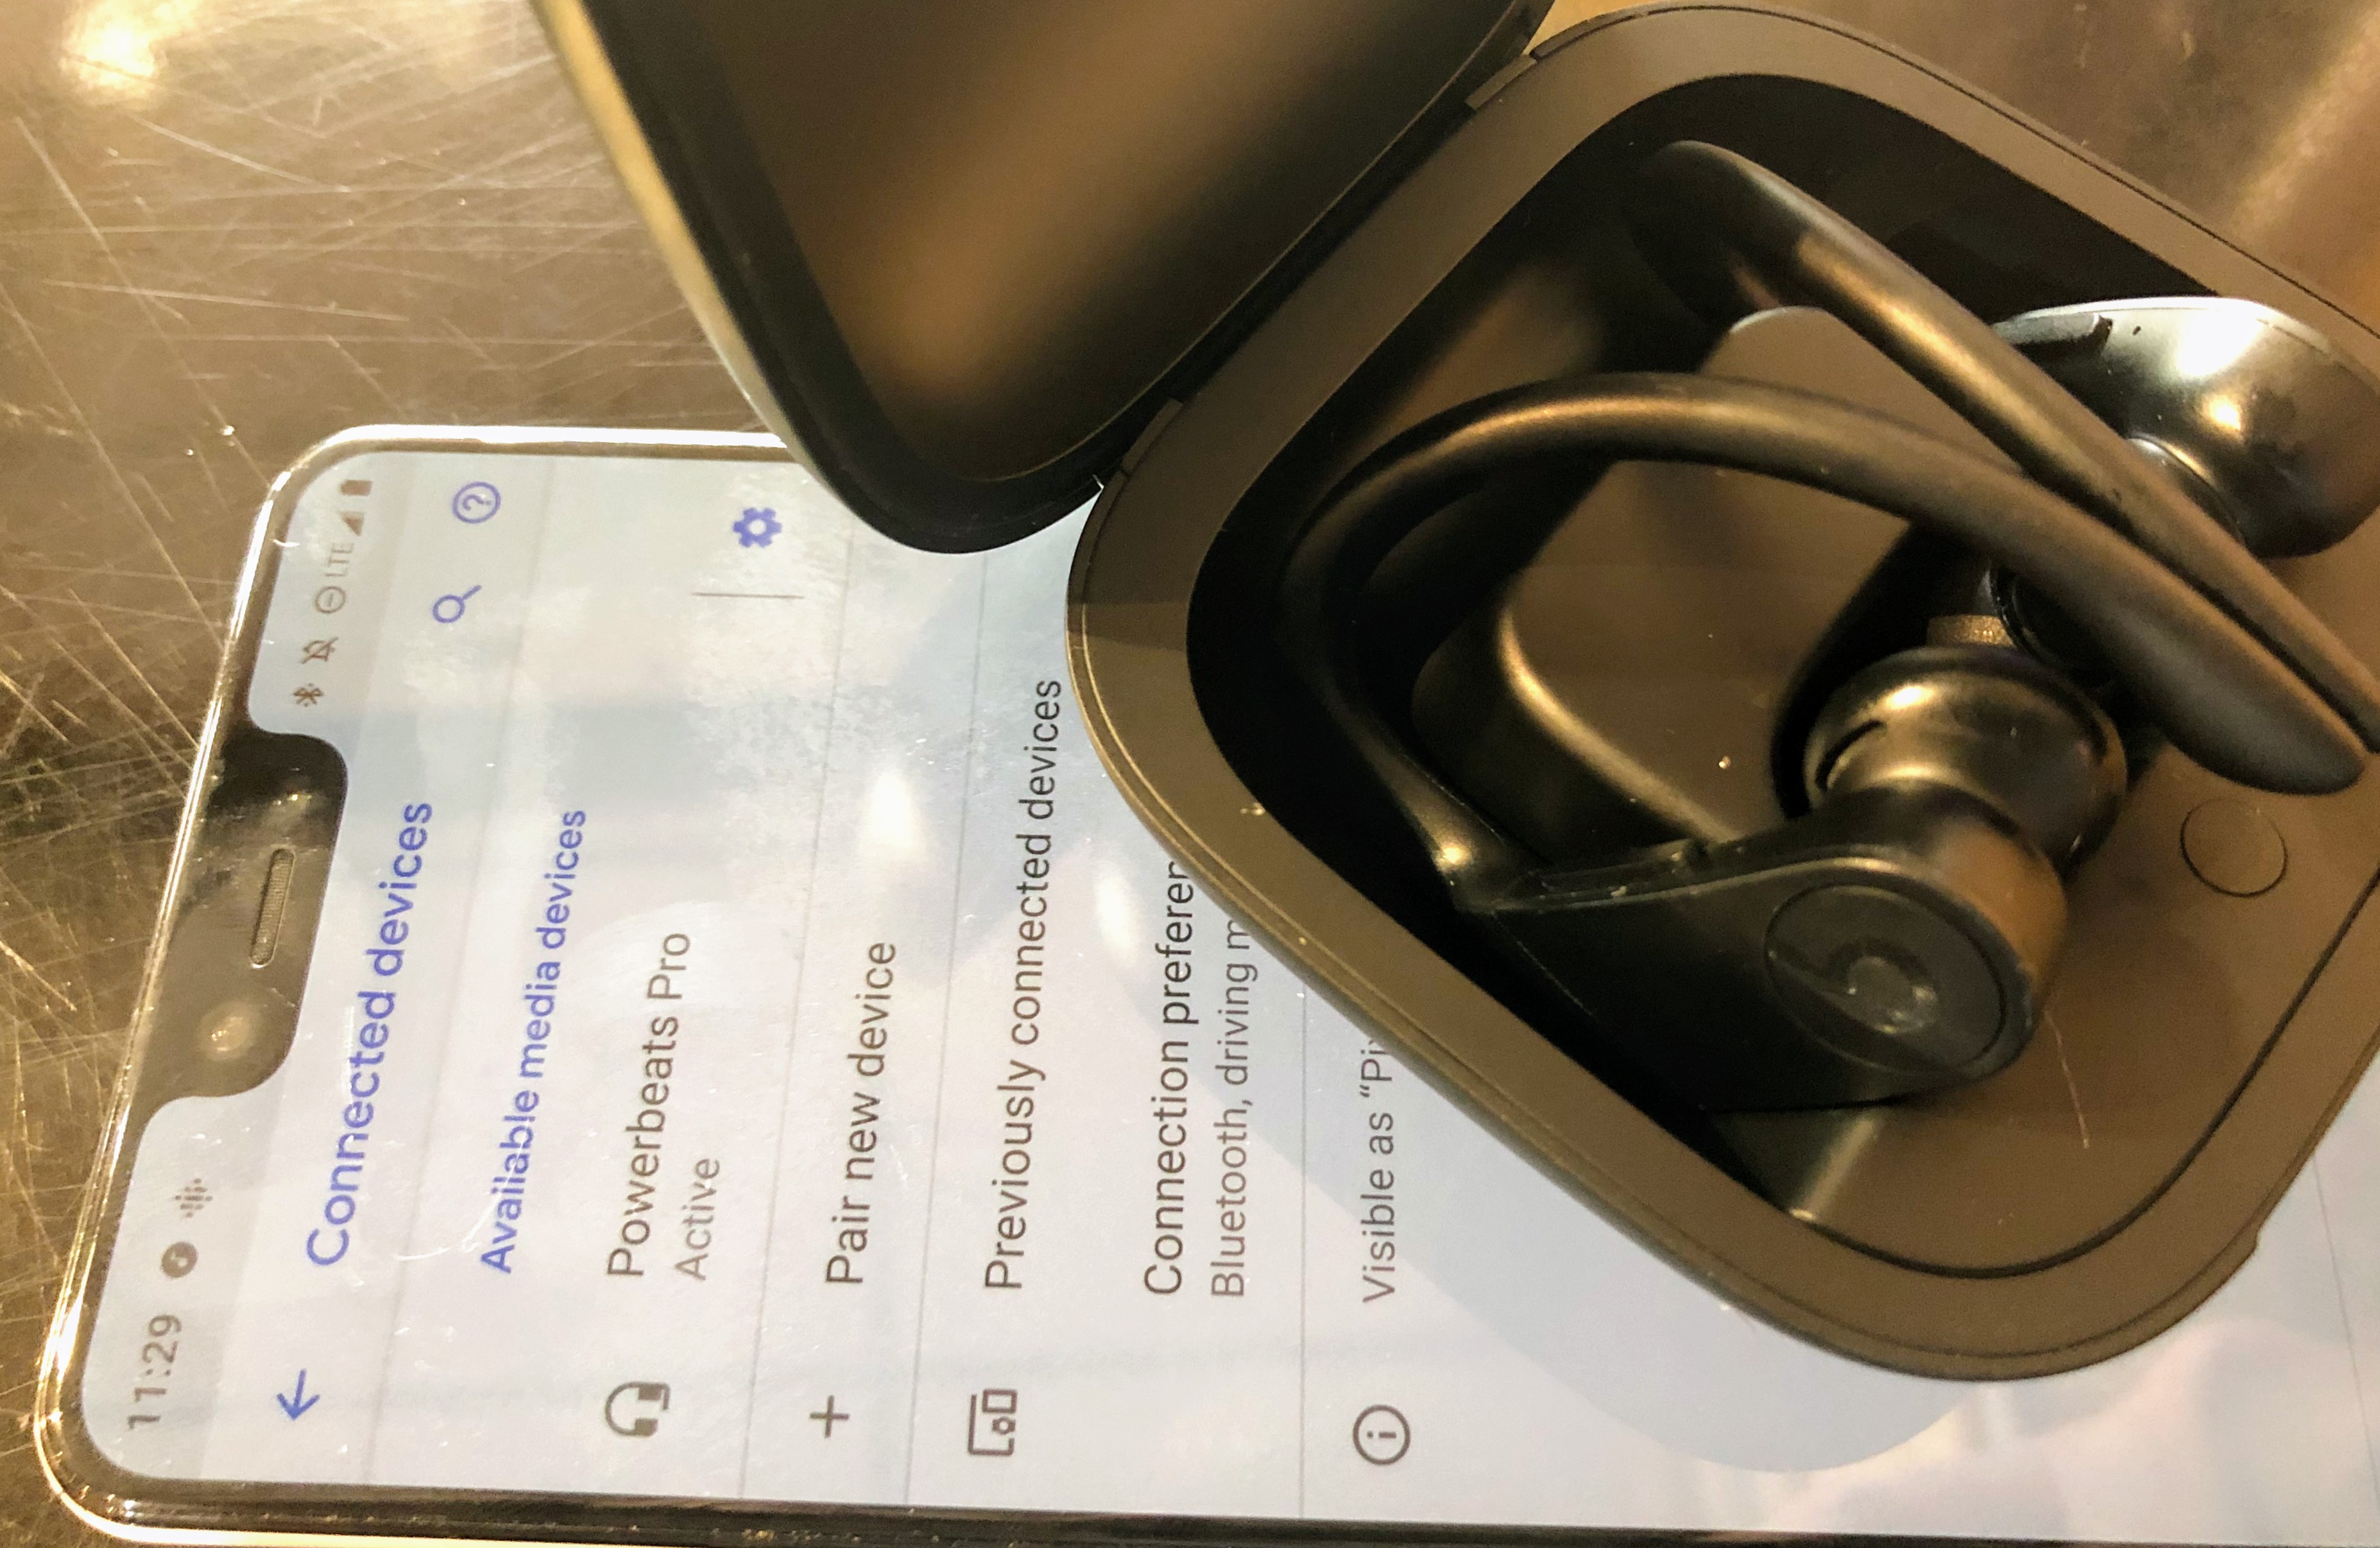 will powerbeats pro work with android